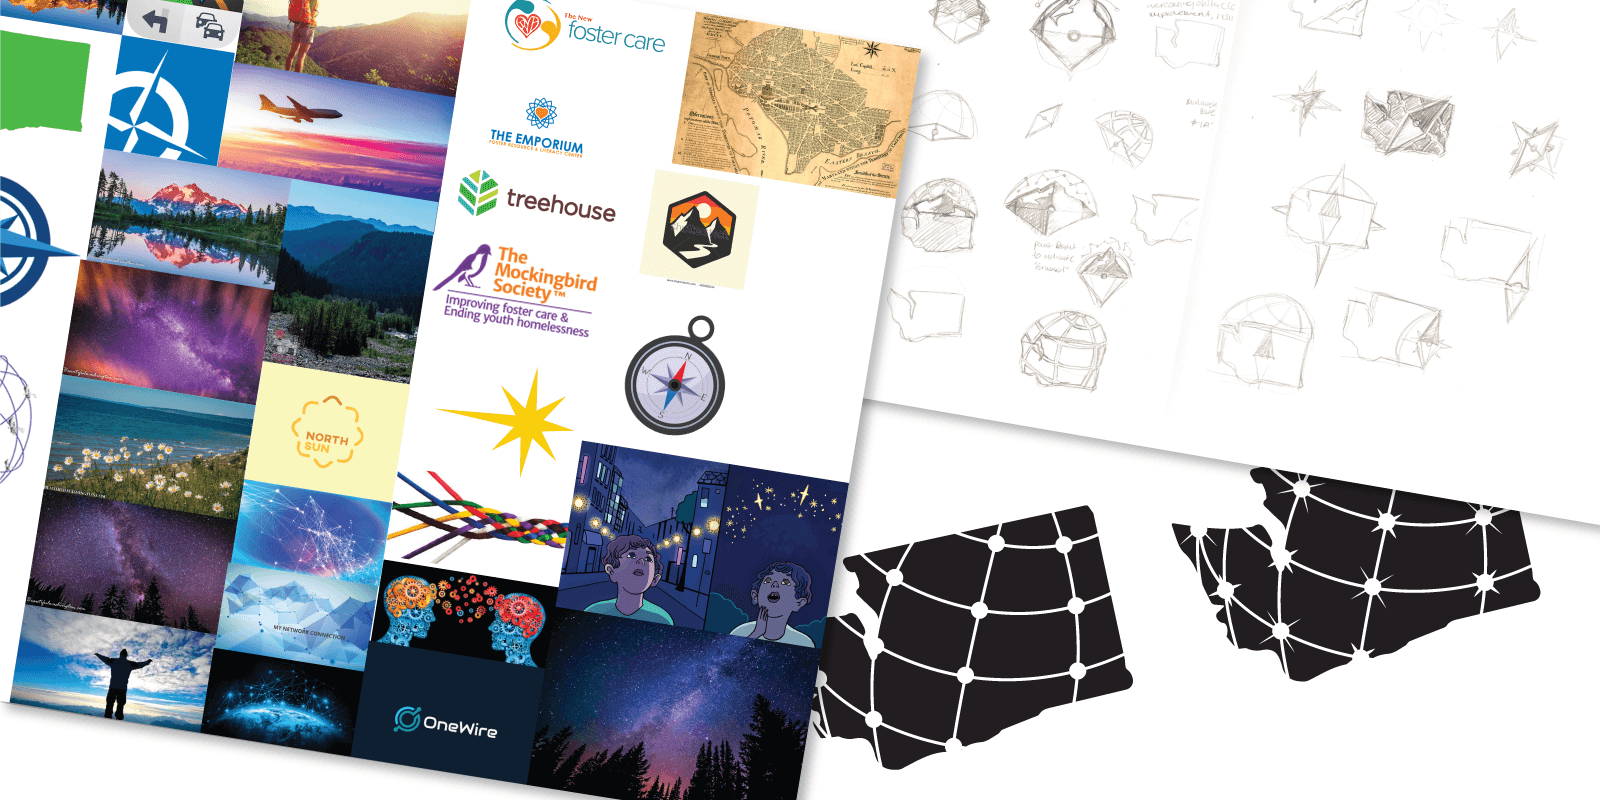 Michael's moodboard, sketches, and digital sketches for the Washington Passport Network's New Logo